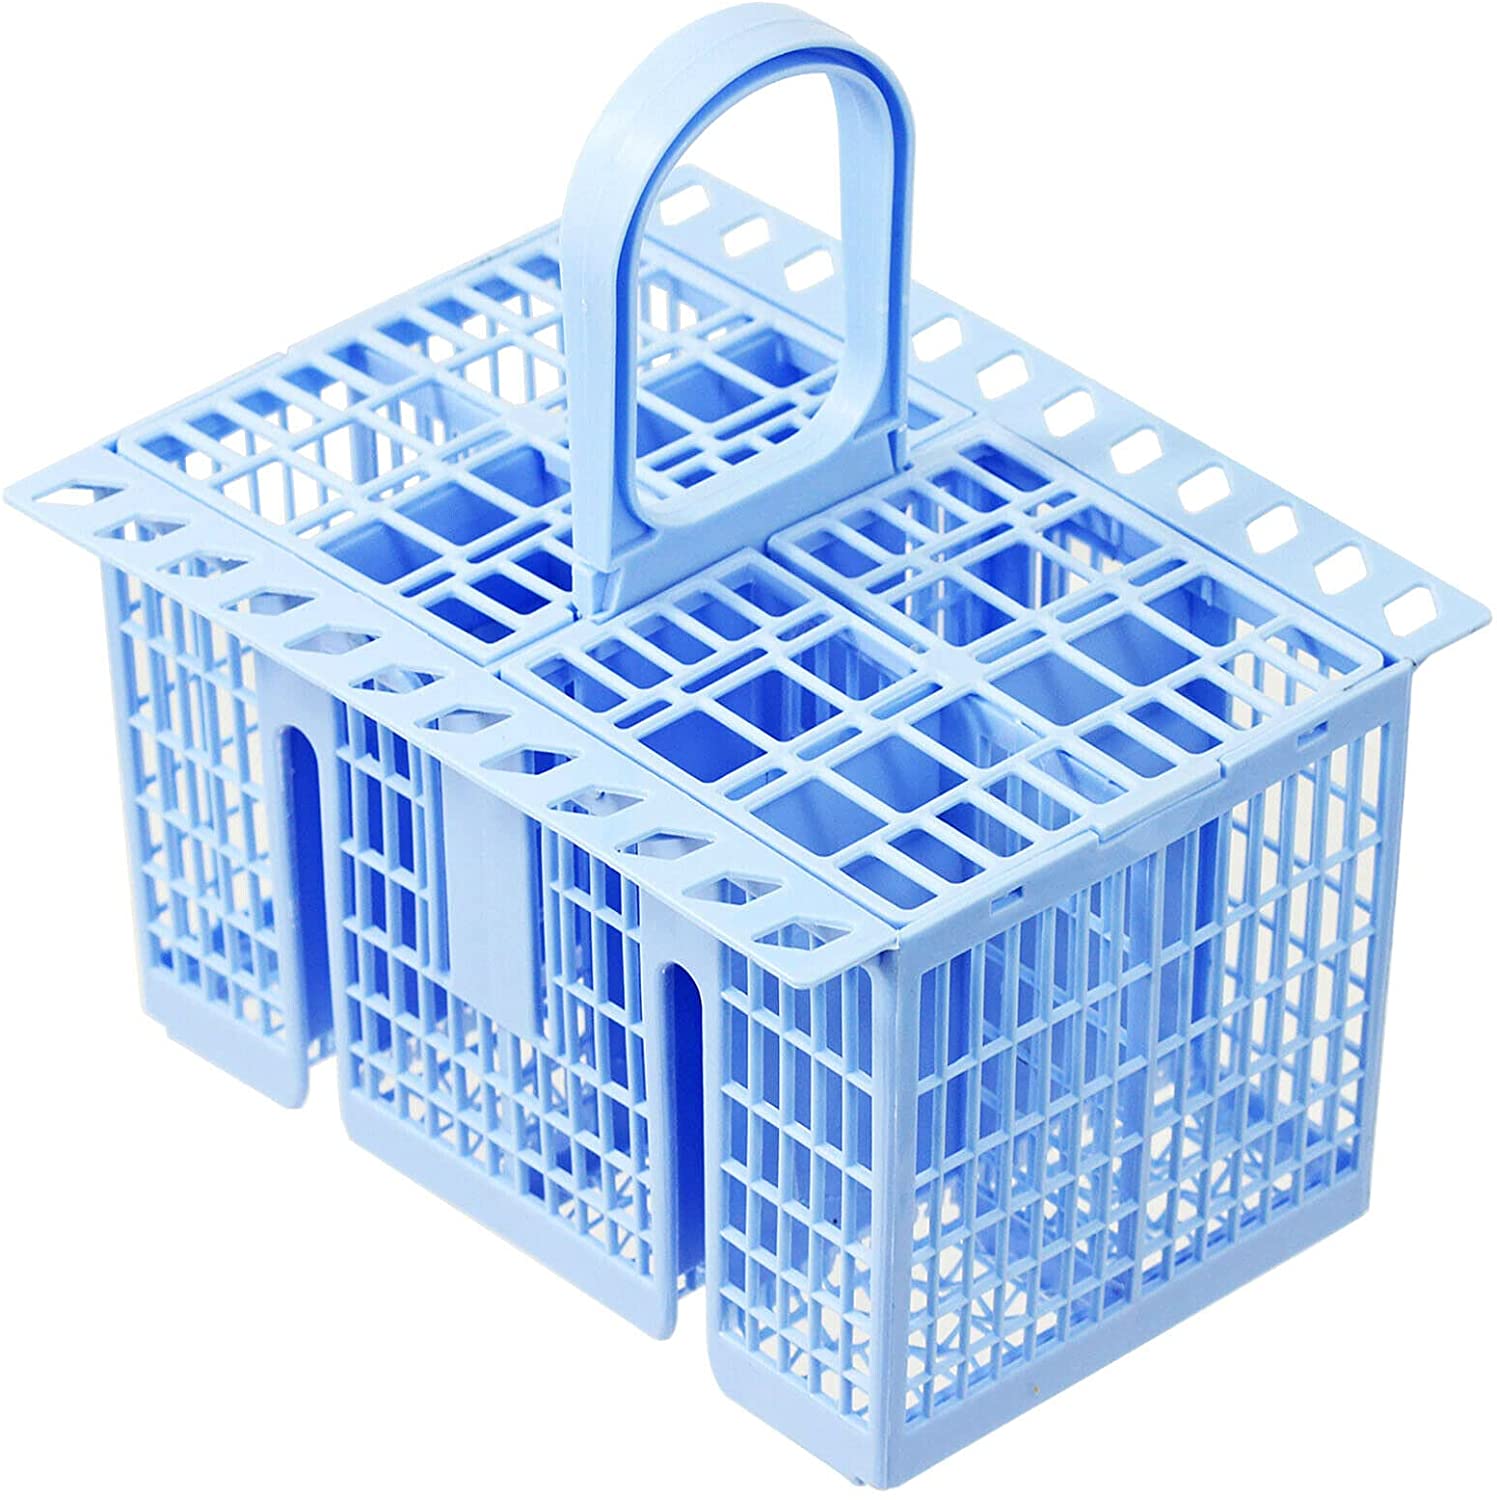 SPARES2GO Cutlery Basket compatible with Hoover Dishwasher (Blue, 220 x 208 x 160mm)